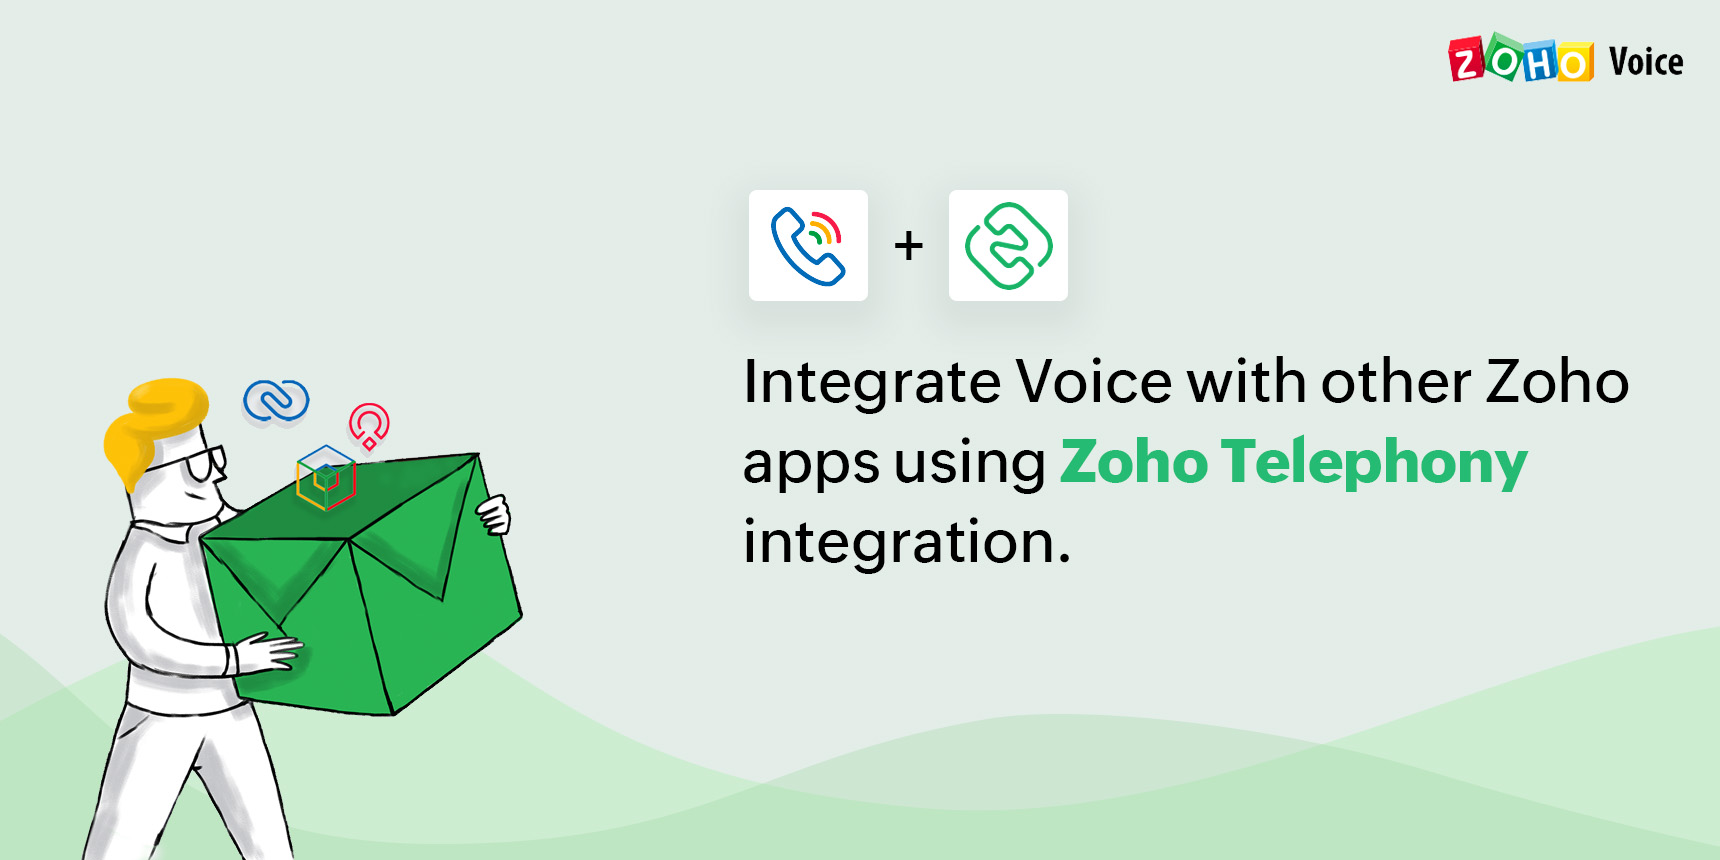 Make and receive calls directly from your Zoho apps using the new Voice-Telephony integration.